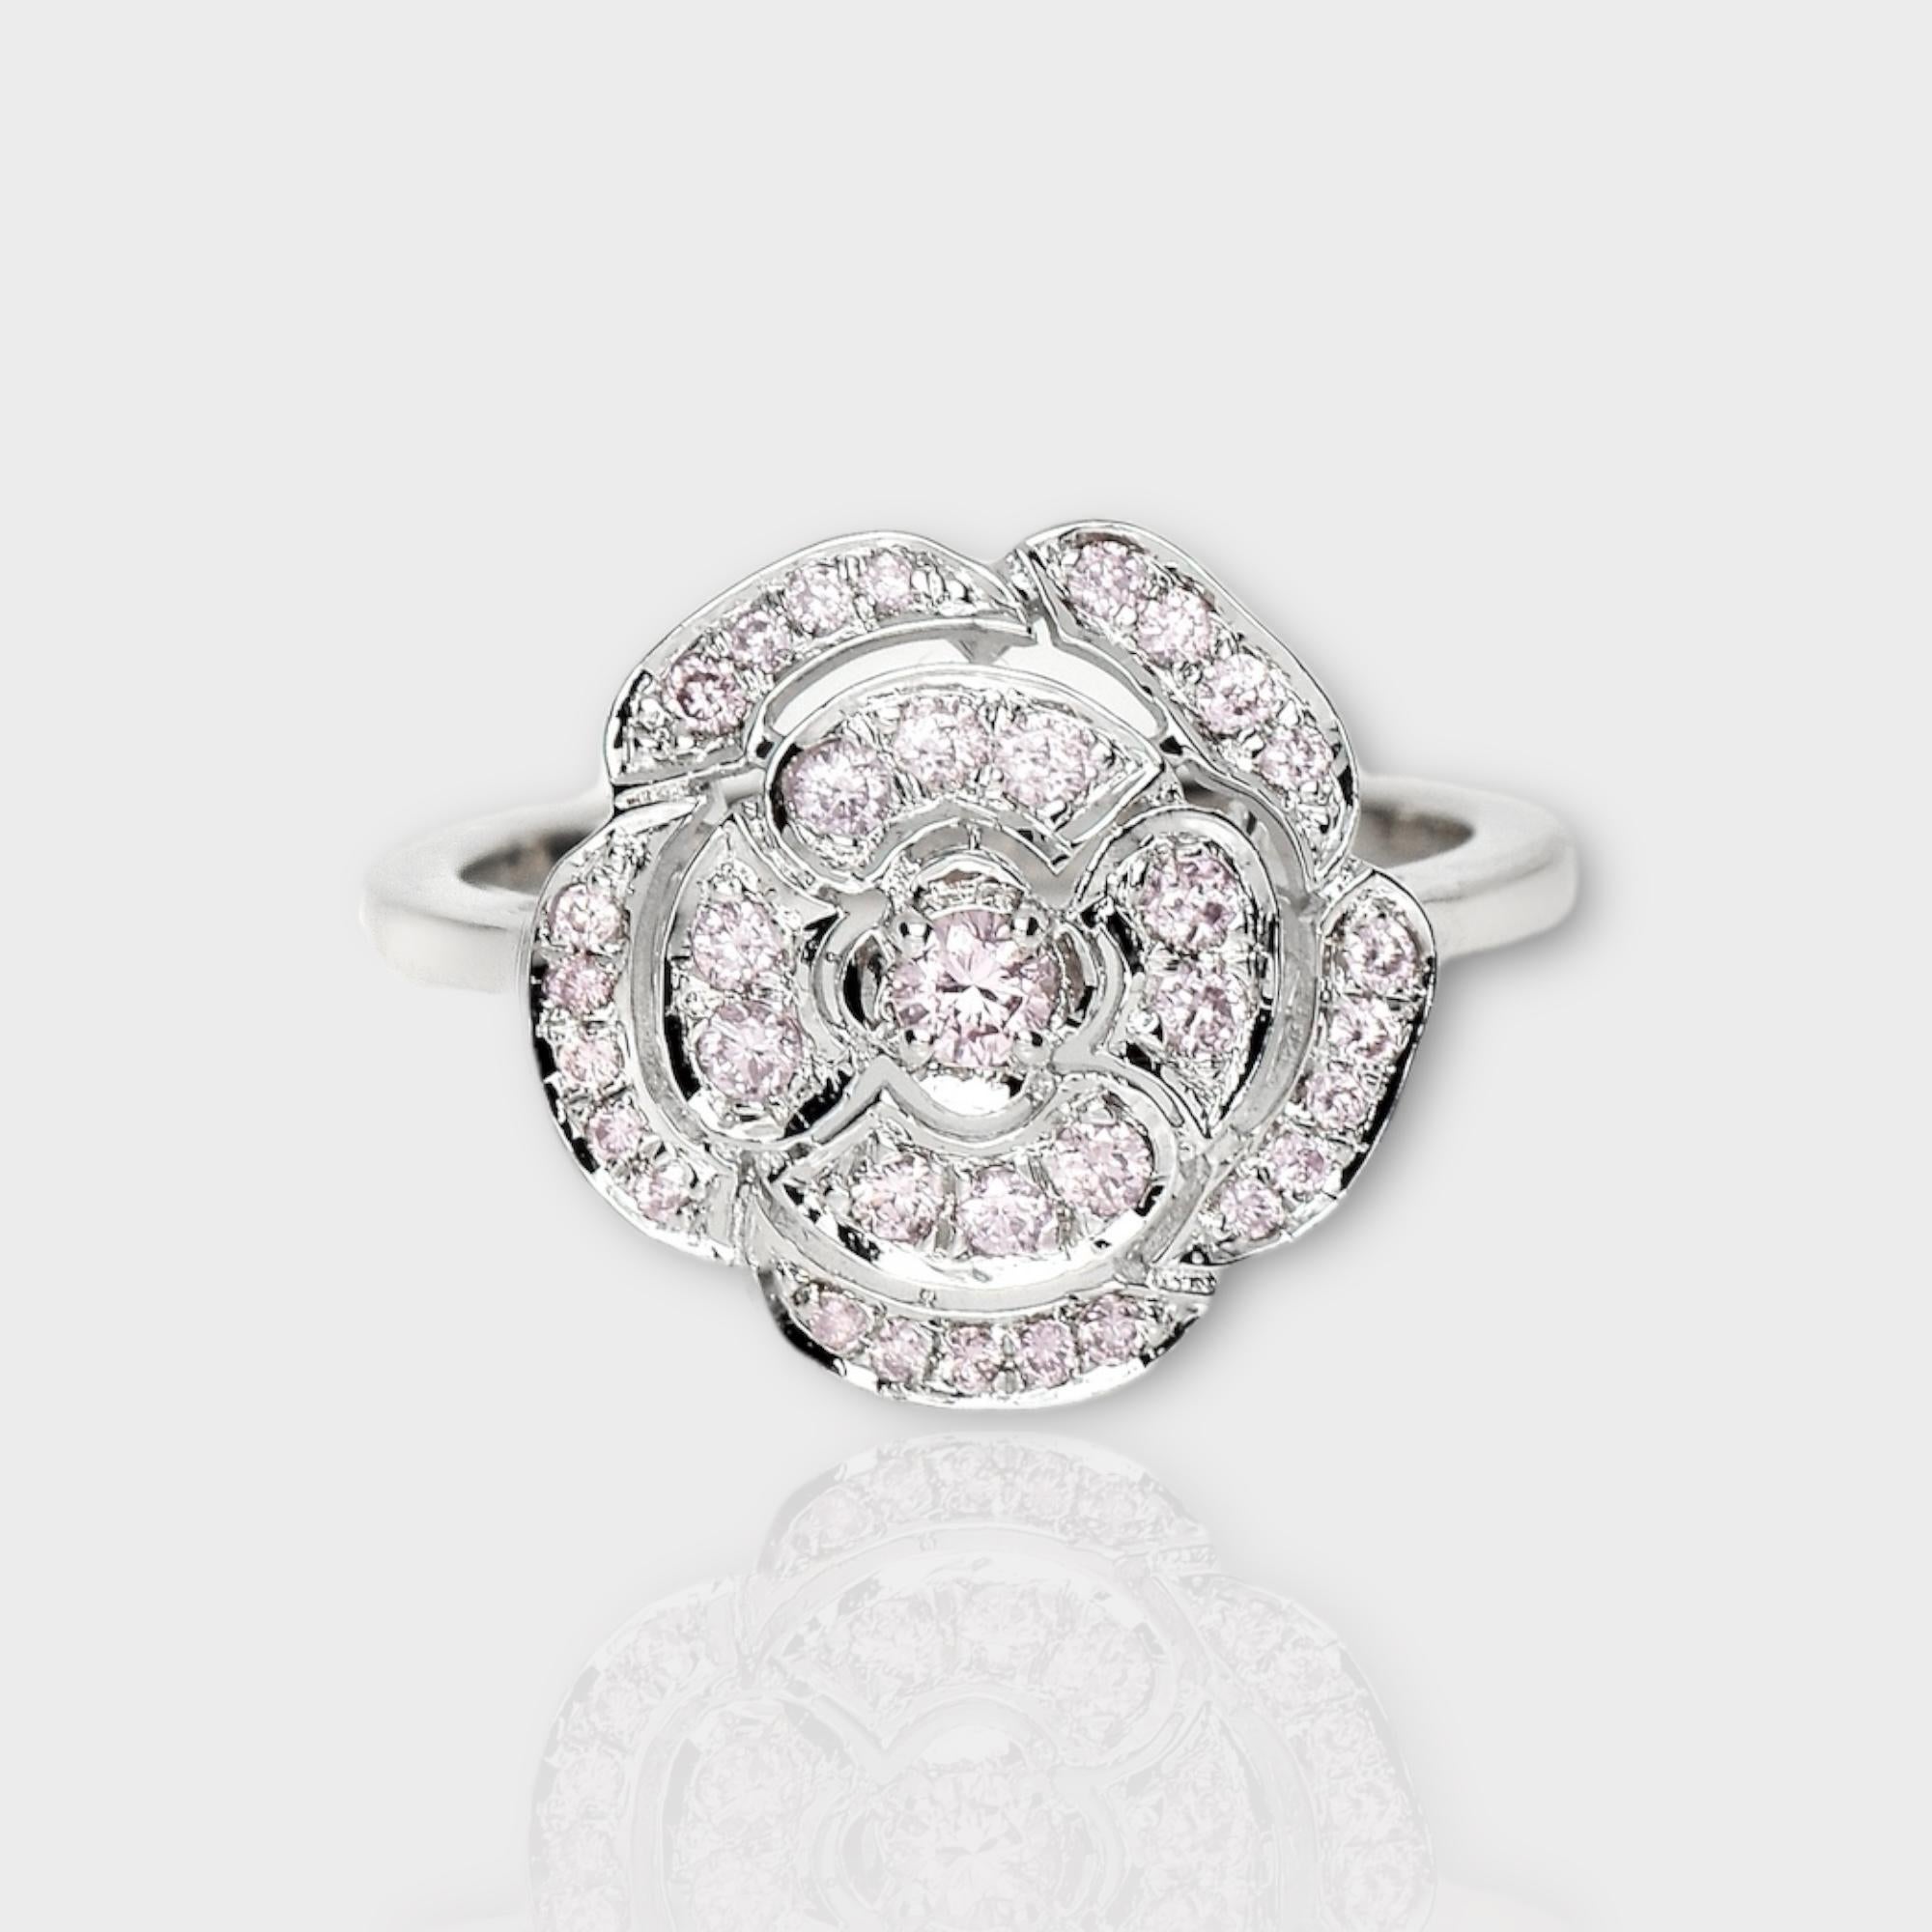 *IGI 14K 0.43 ct Natural Pink Diamonds Rose Design  Antique Art Deco Ring*

This band features a stunning design with a rose crafted from 14K white gold. It is set with natural pink diamonds weighing 0.43 carats.

This ring features colorful natural